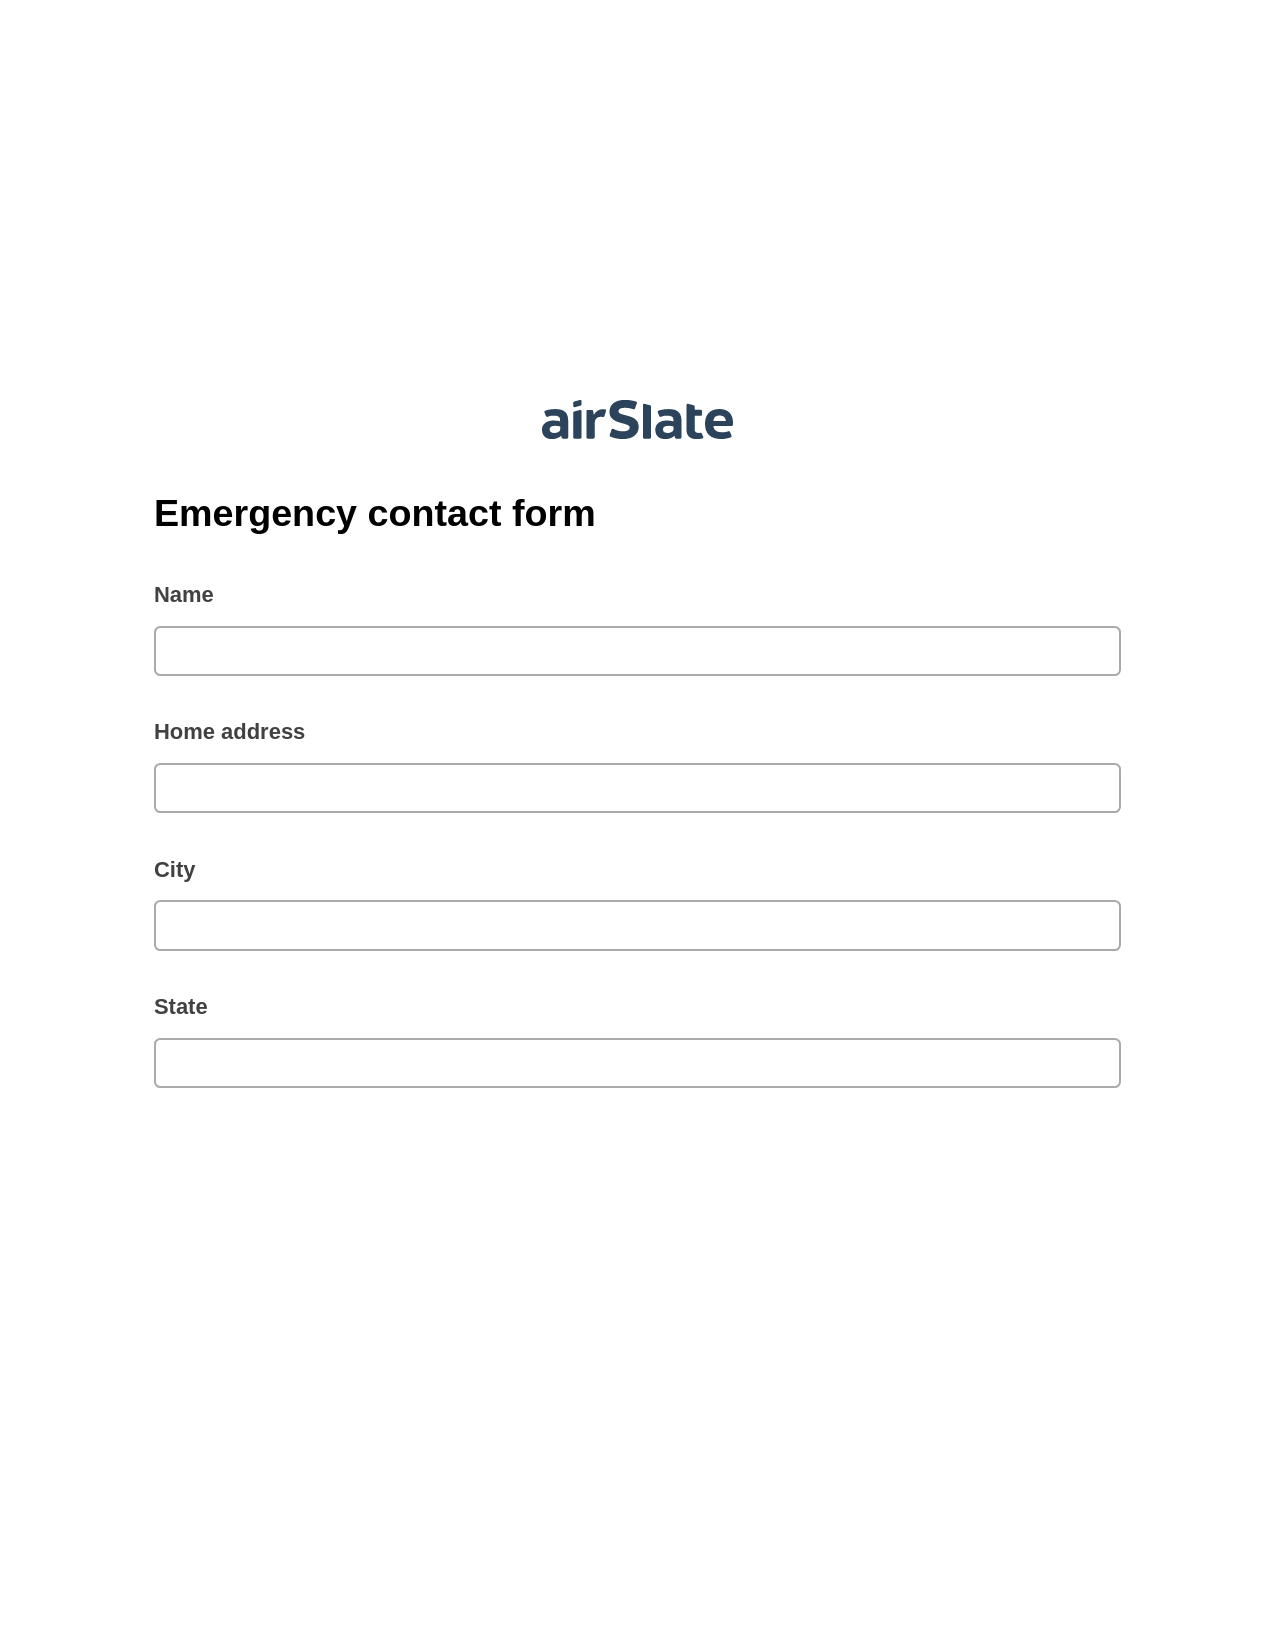 Emergency contact form Pre-fill from Excel Spreadsheet Dropdown Options Bot, Lock the slate bot, Archive to SharePoint Folder Bot